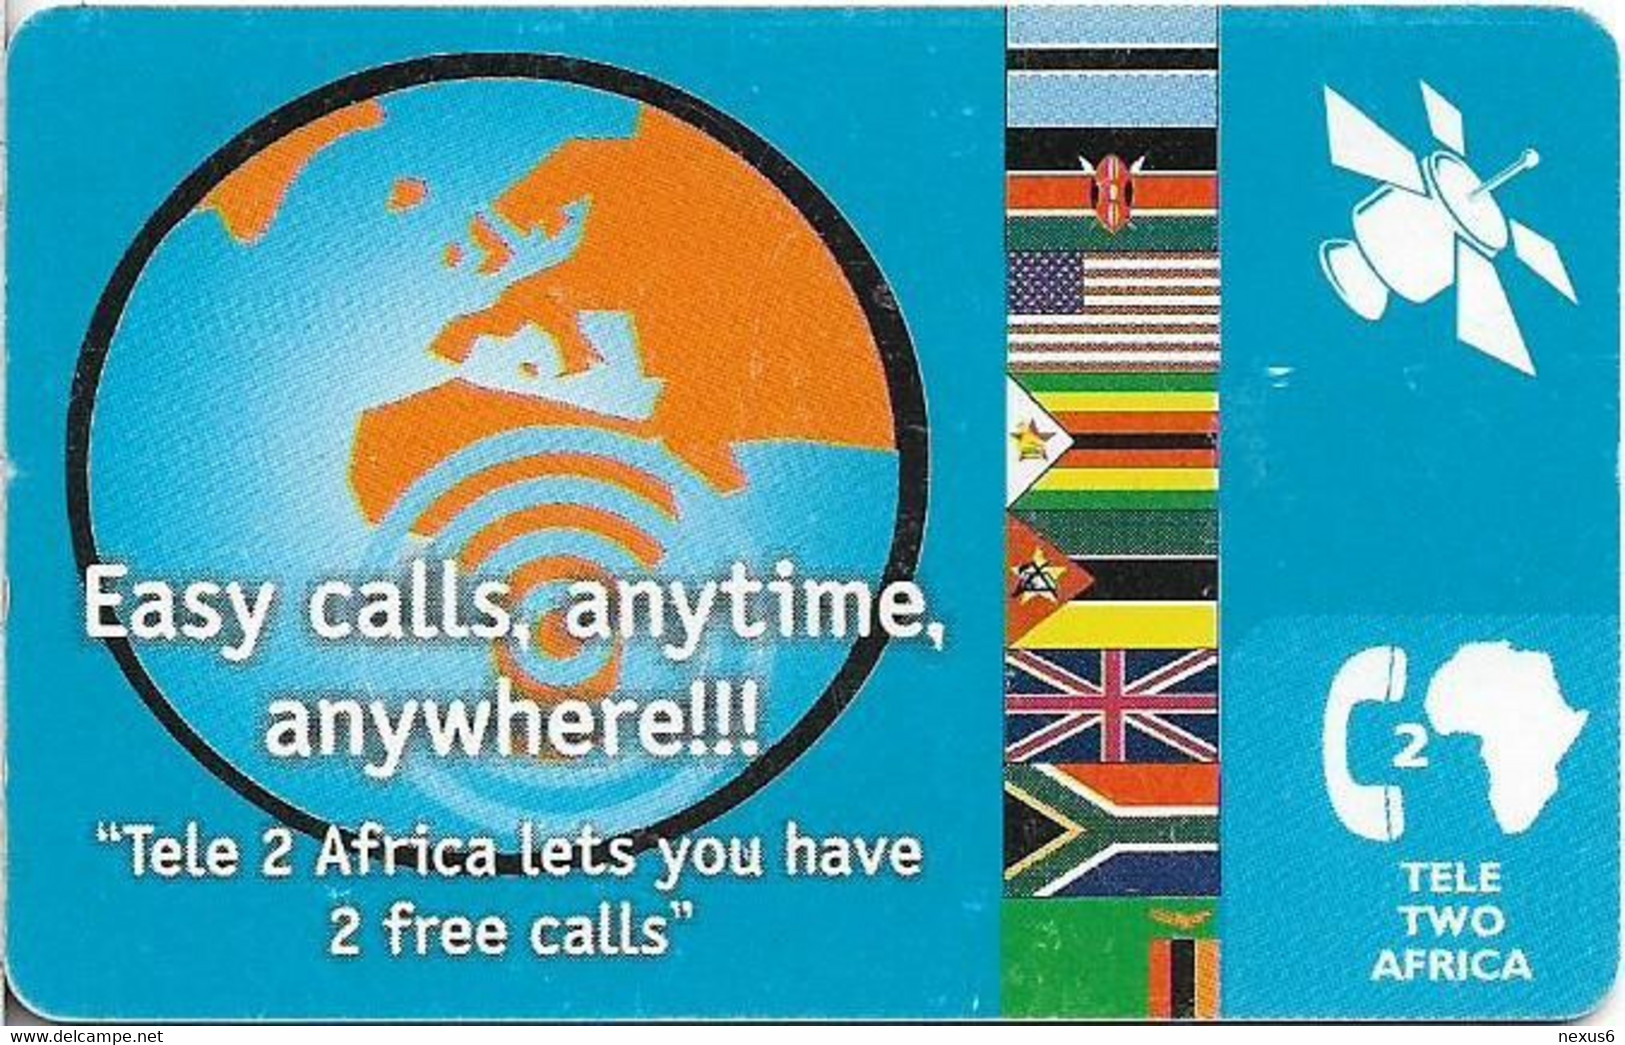 Zambia - Tele Two - Easy Calls, Anytime, Anywhere, Siemens S35, 50Units, Used - Zambia